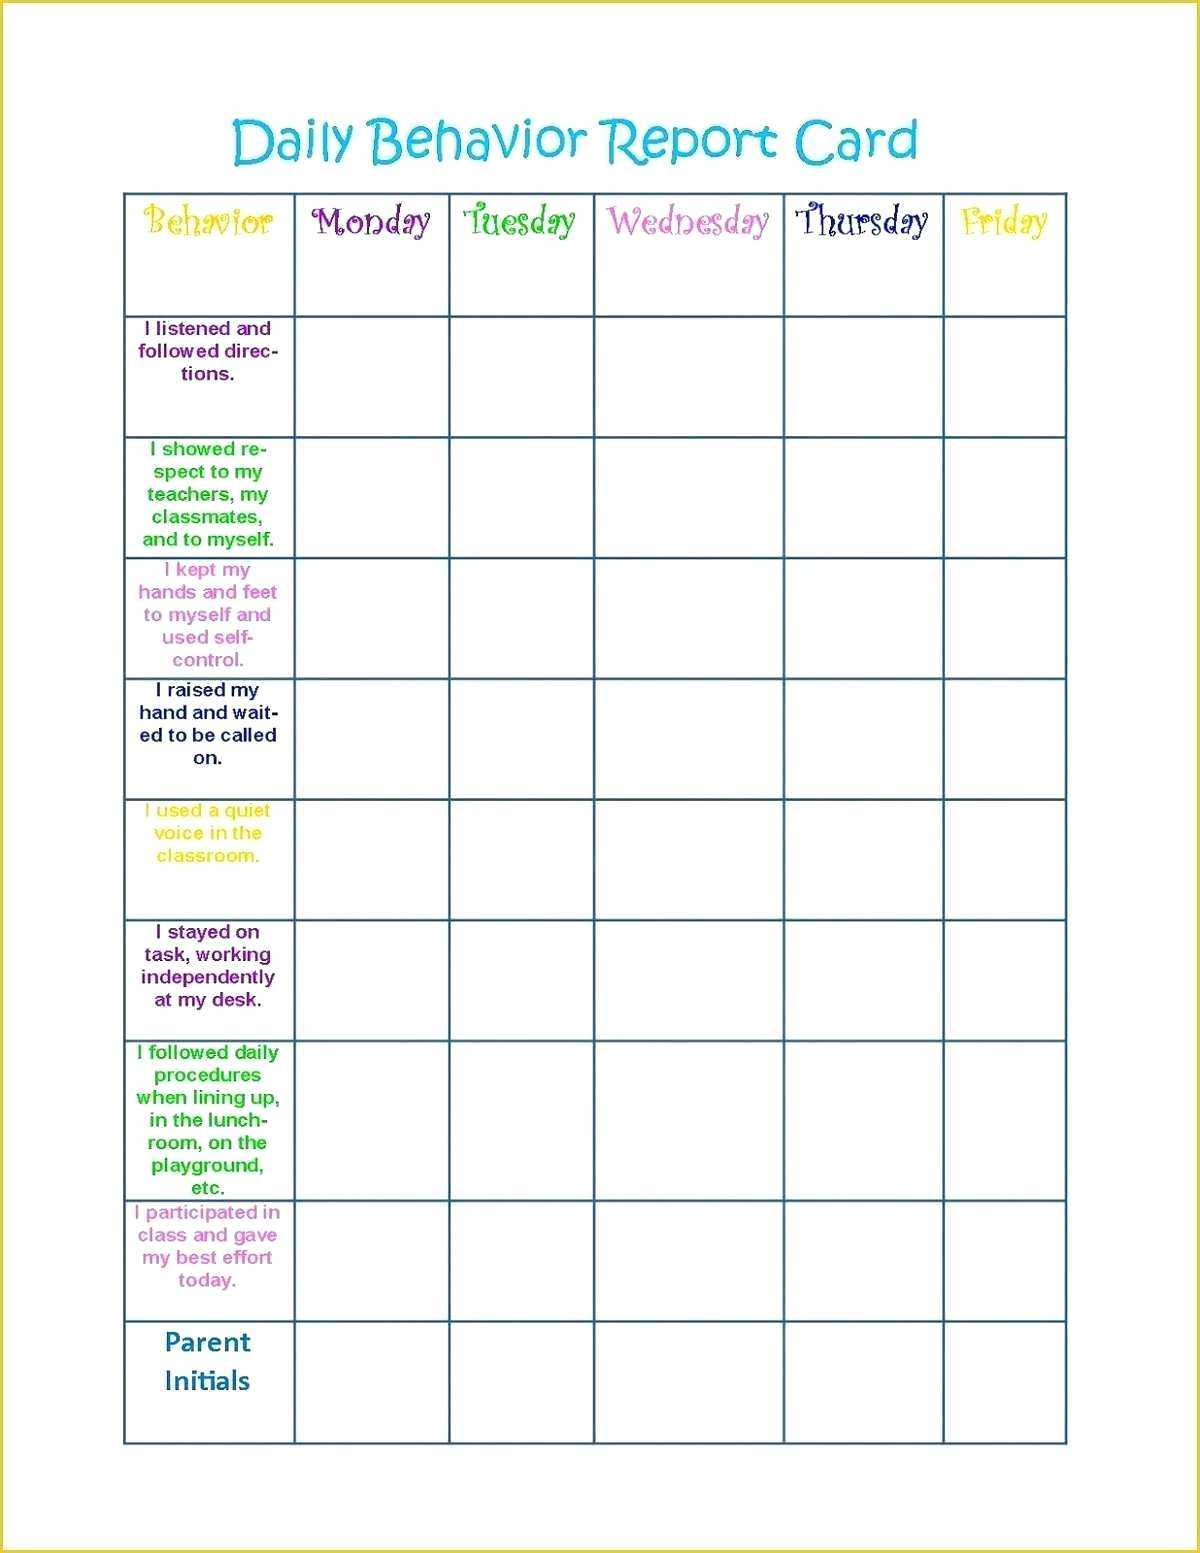 021 Free Behavior Chart Template Of Daily Printable Colorful Pertaining To Daily Behavior Report Template